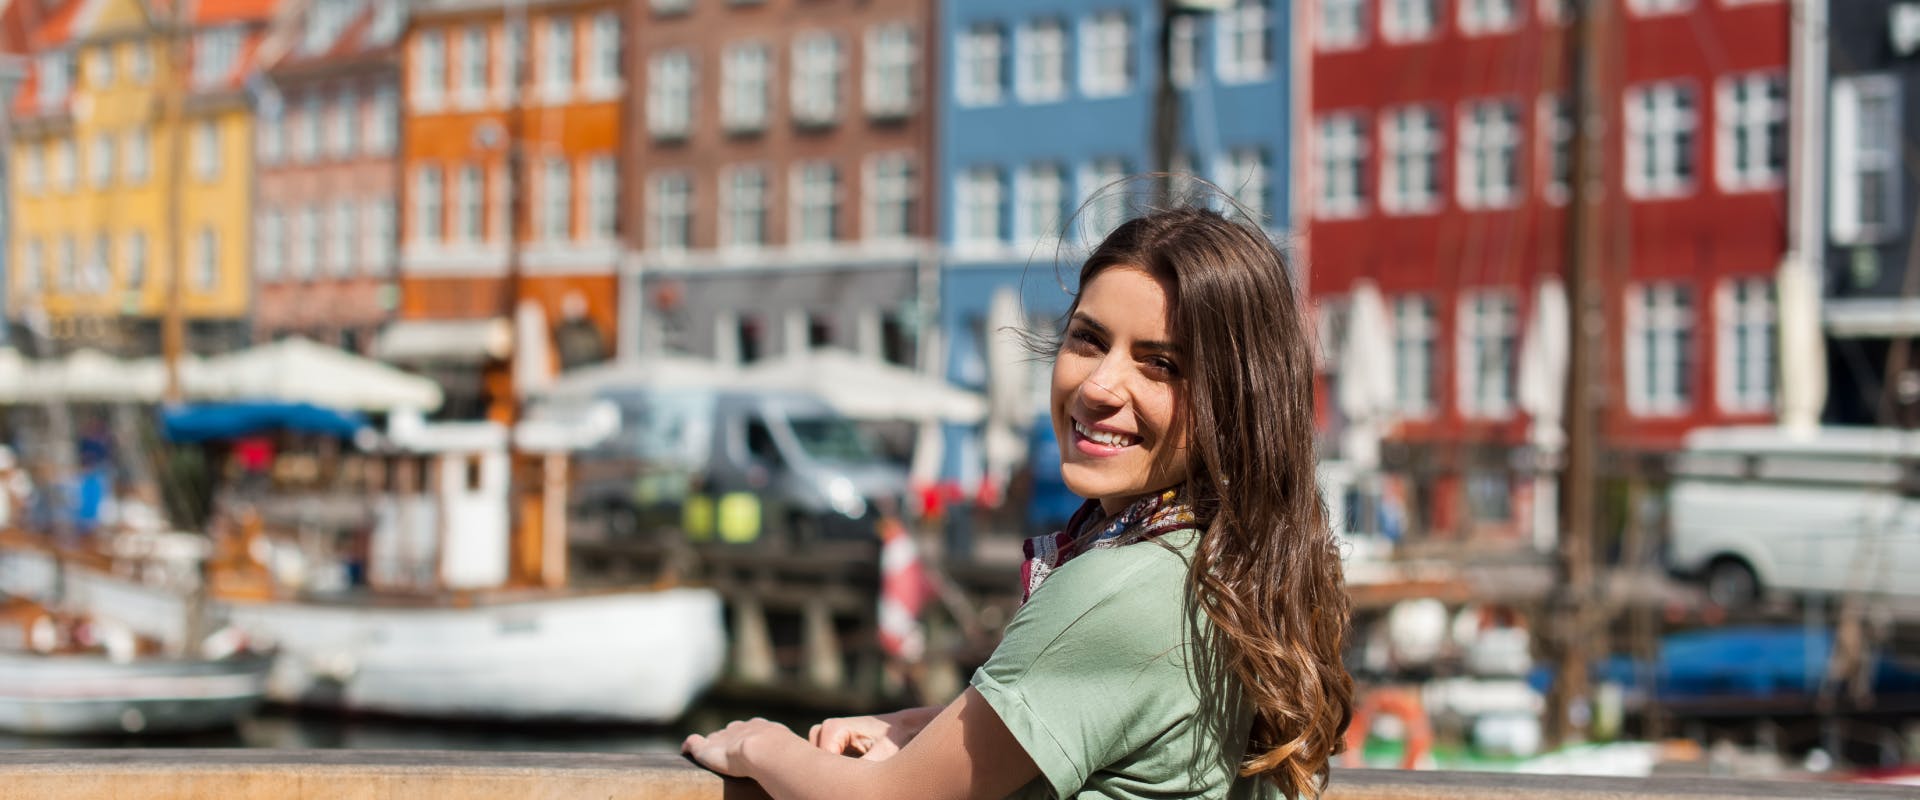 a solo female traveler enjoying a sunny day next to the Copenhagen canals